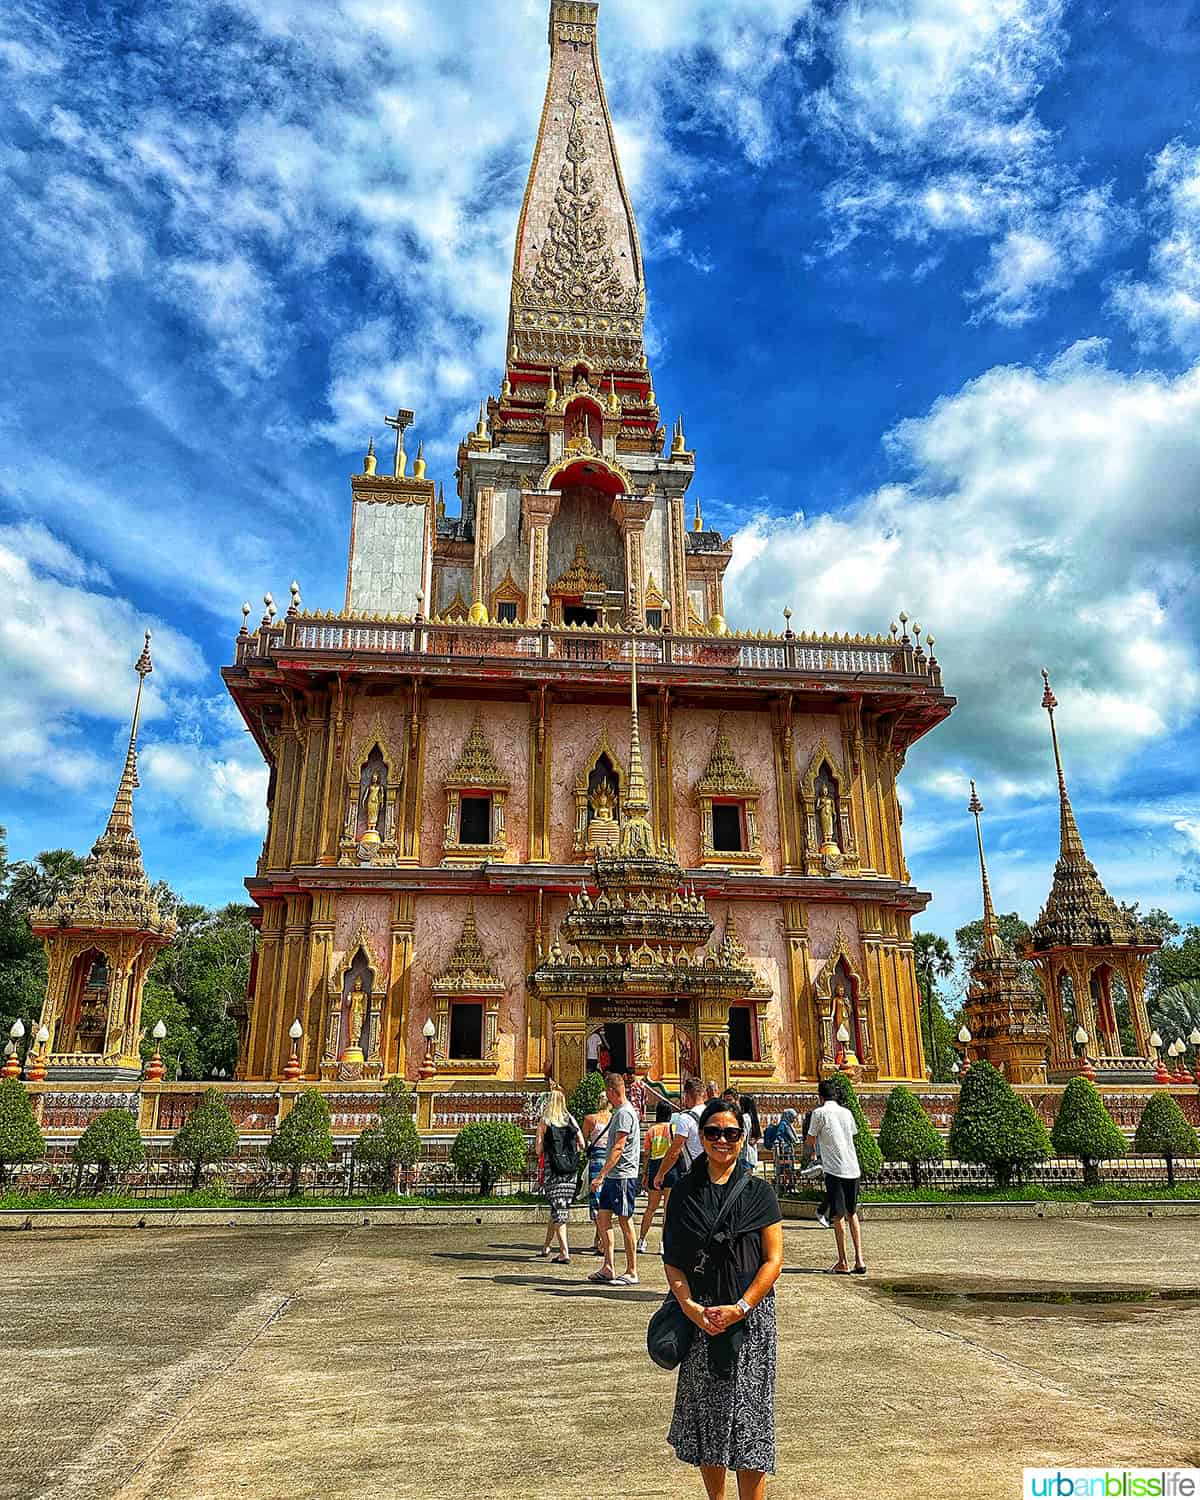 Marlynn in front of Wat Chalong temple in Phuket Thailand.